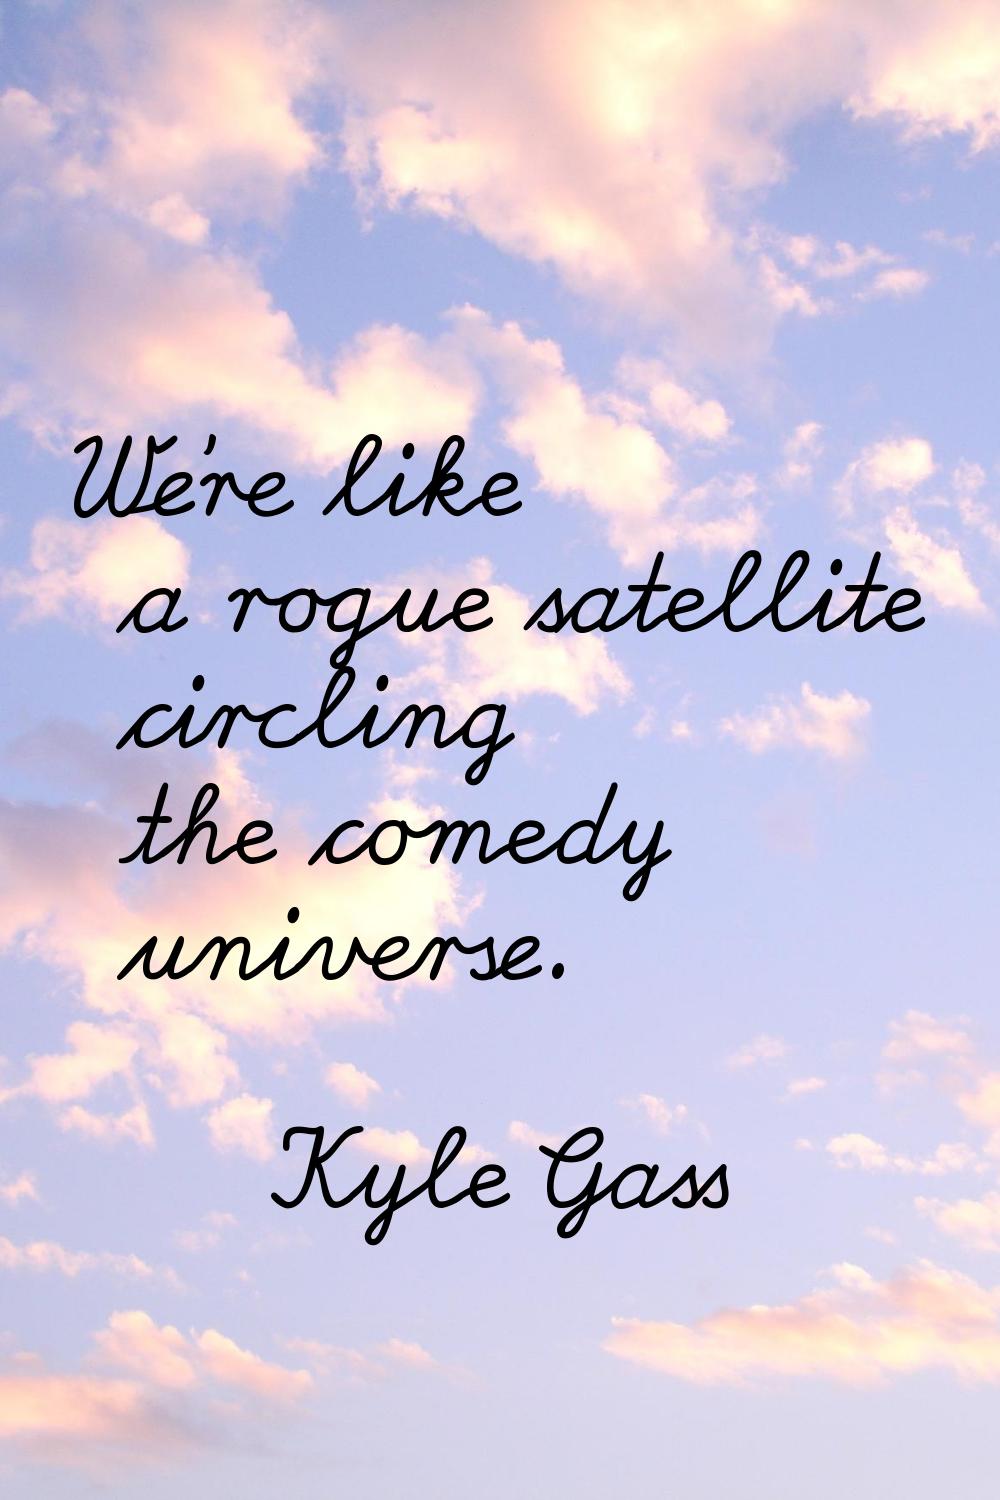 We're like a rogue satellite circling the comedy universe.